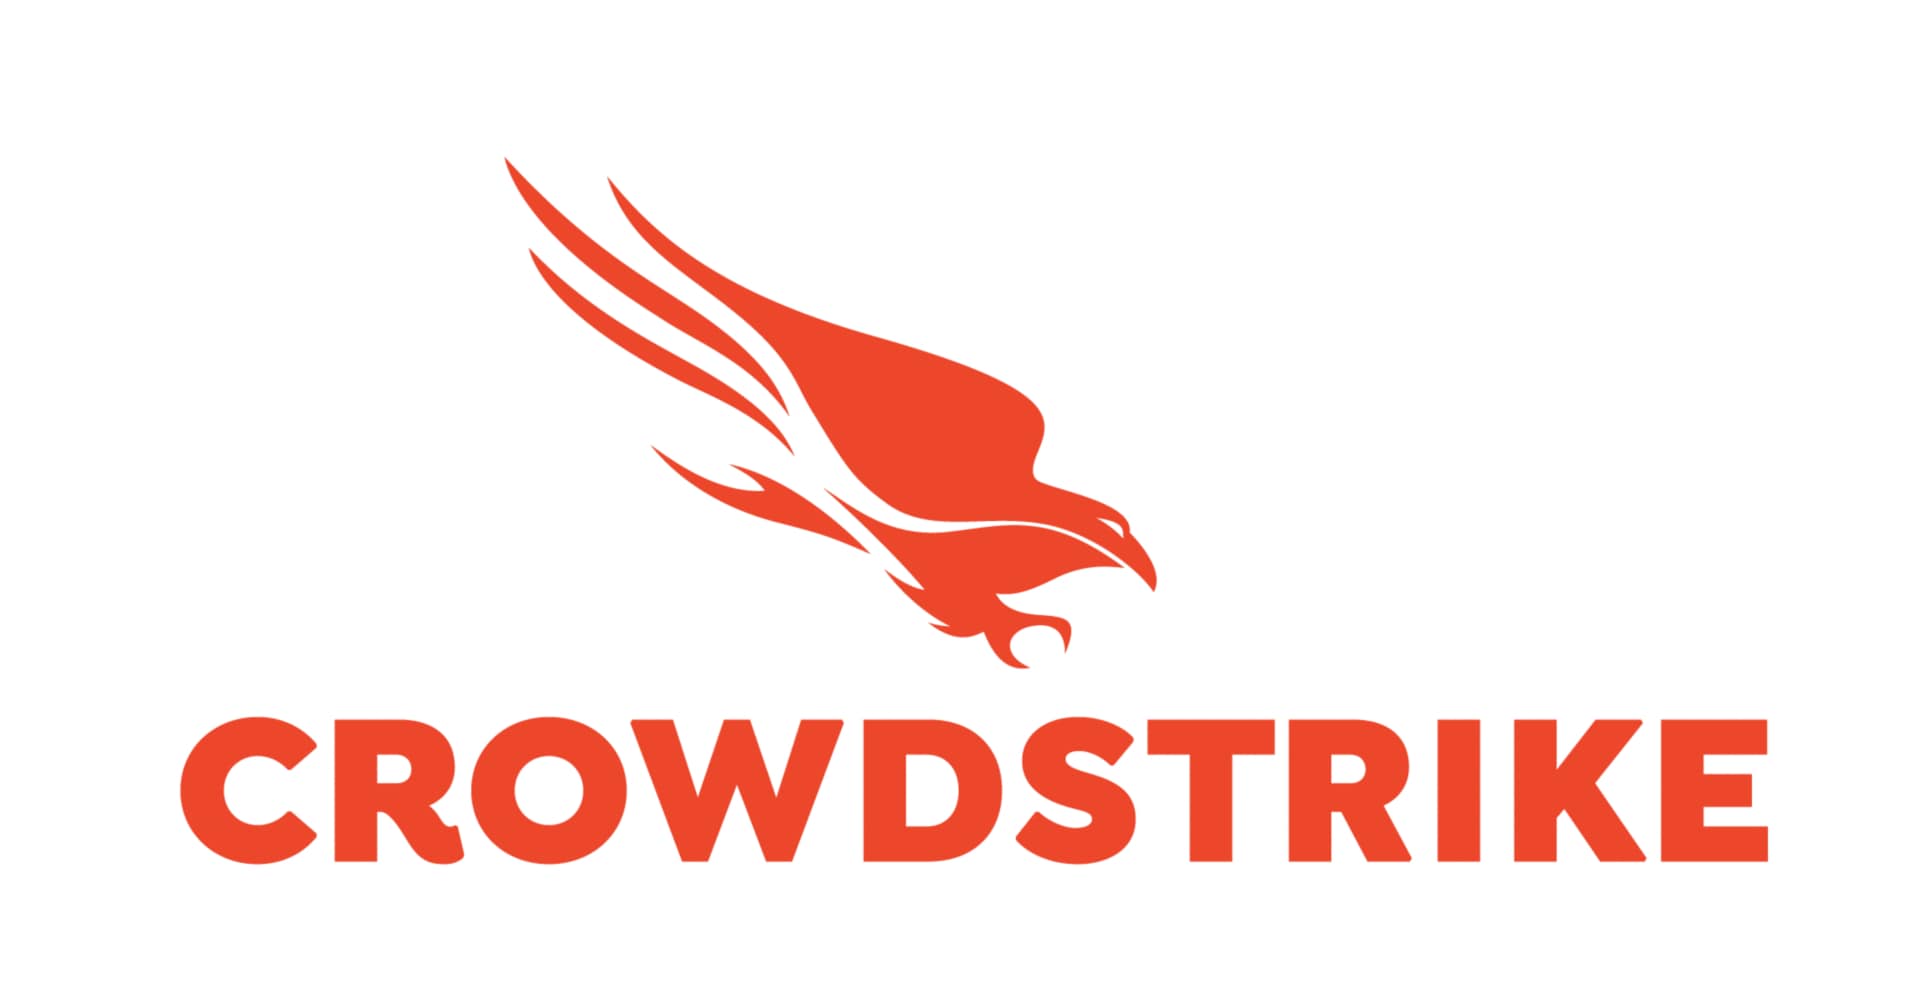 CrowdStrike Falcon Cloud Security with Containers Reserved - Flex Software